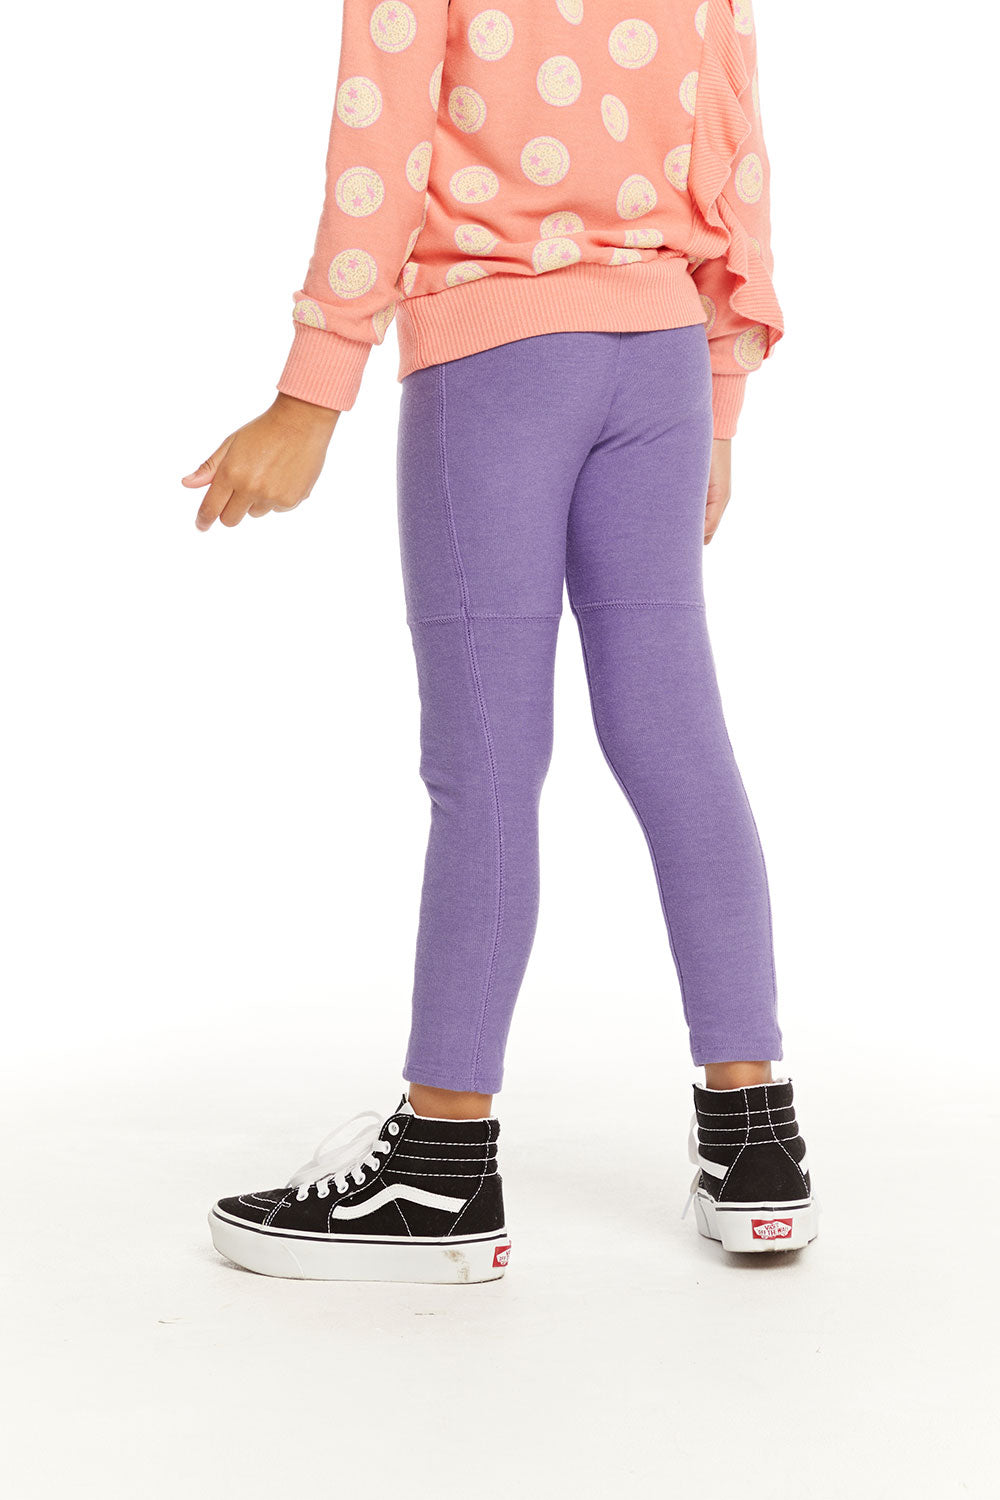 Seamed Panel Veronica Purple Jogger GIRLS chaserbrand